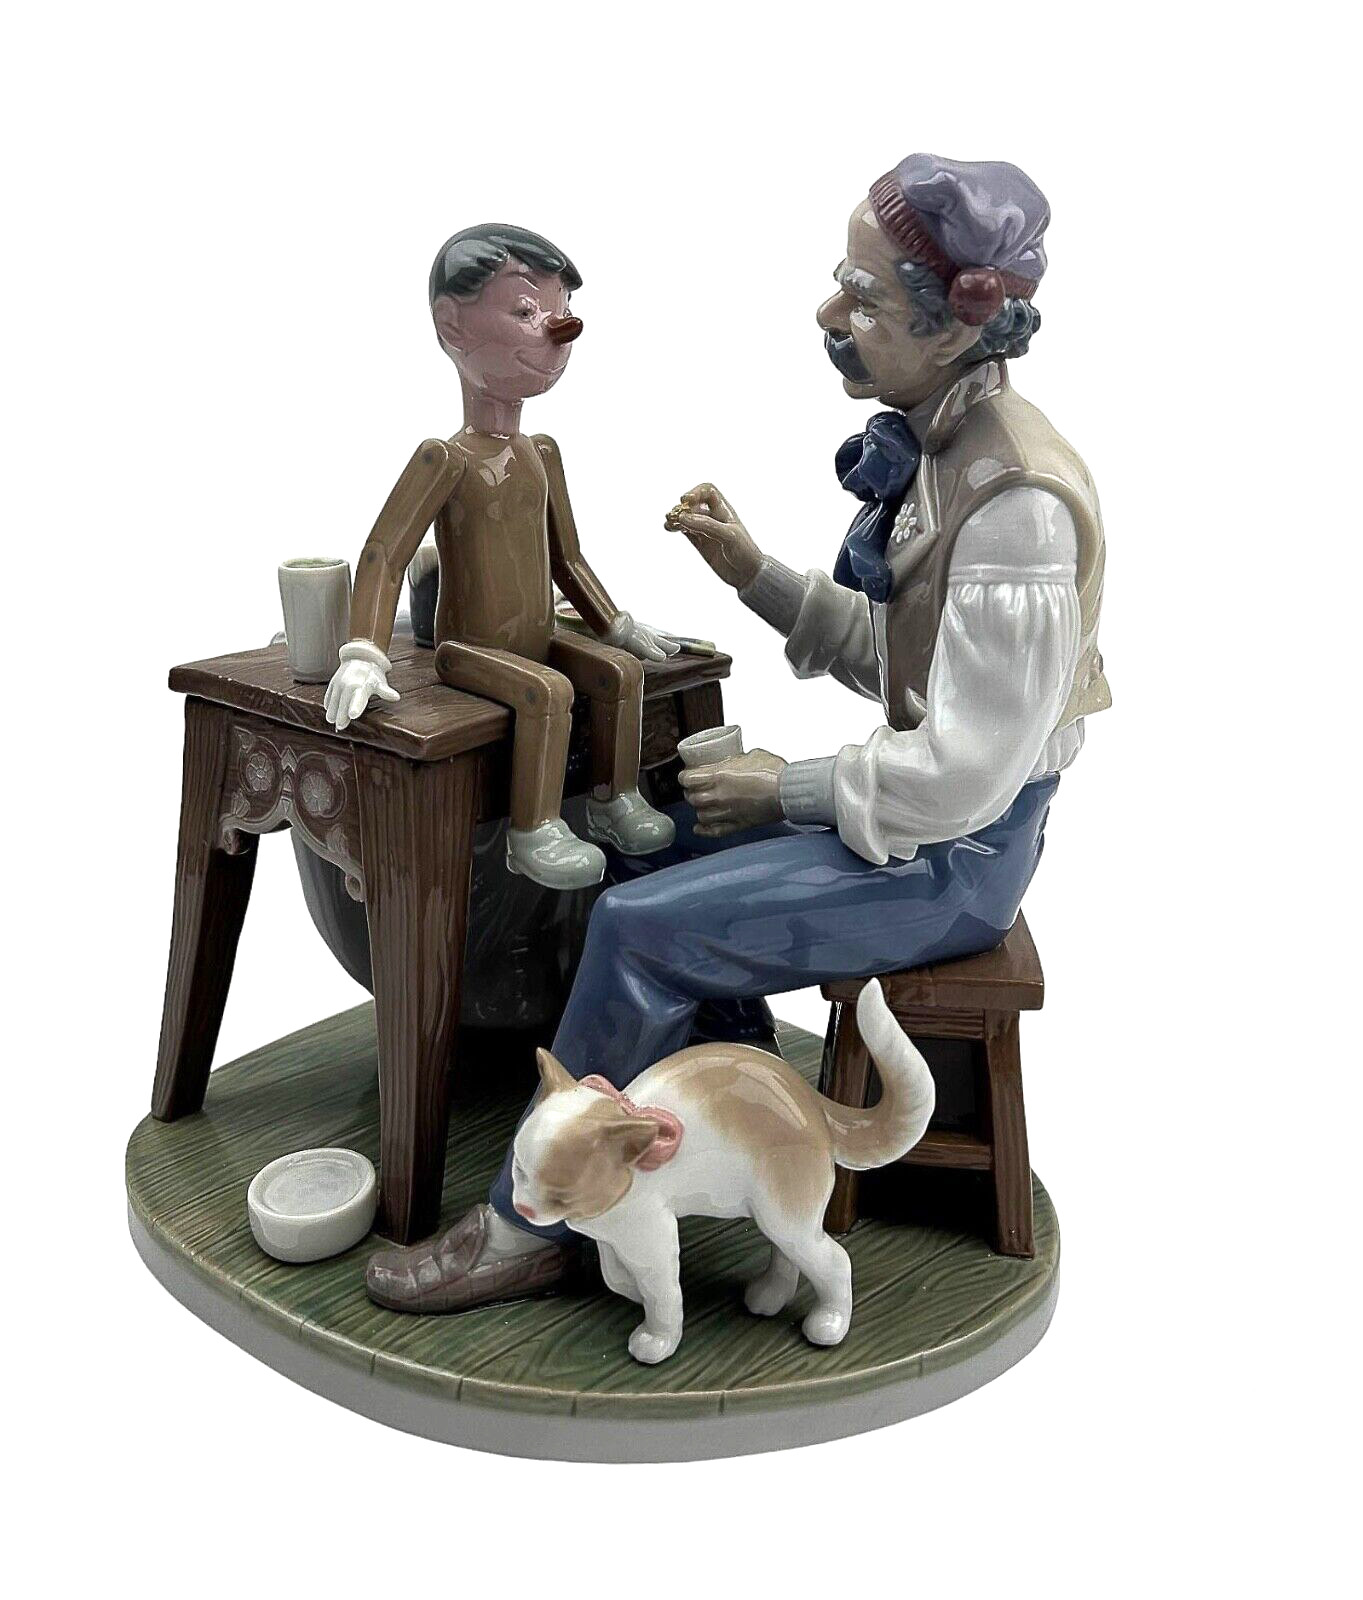 Lladro The PUPPET PAINTER Figurine Geppetto & Pinocchio 5396 Retired 2005 Spain